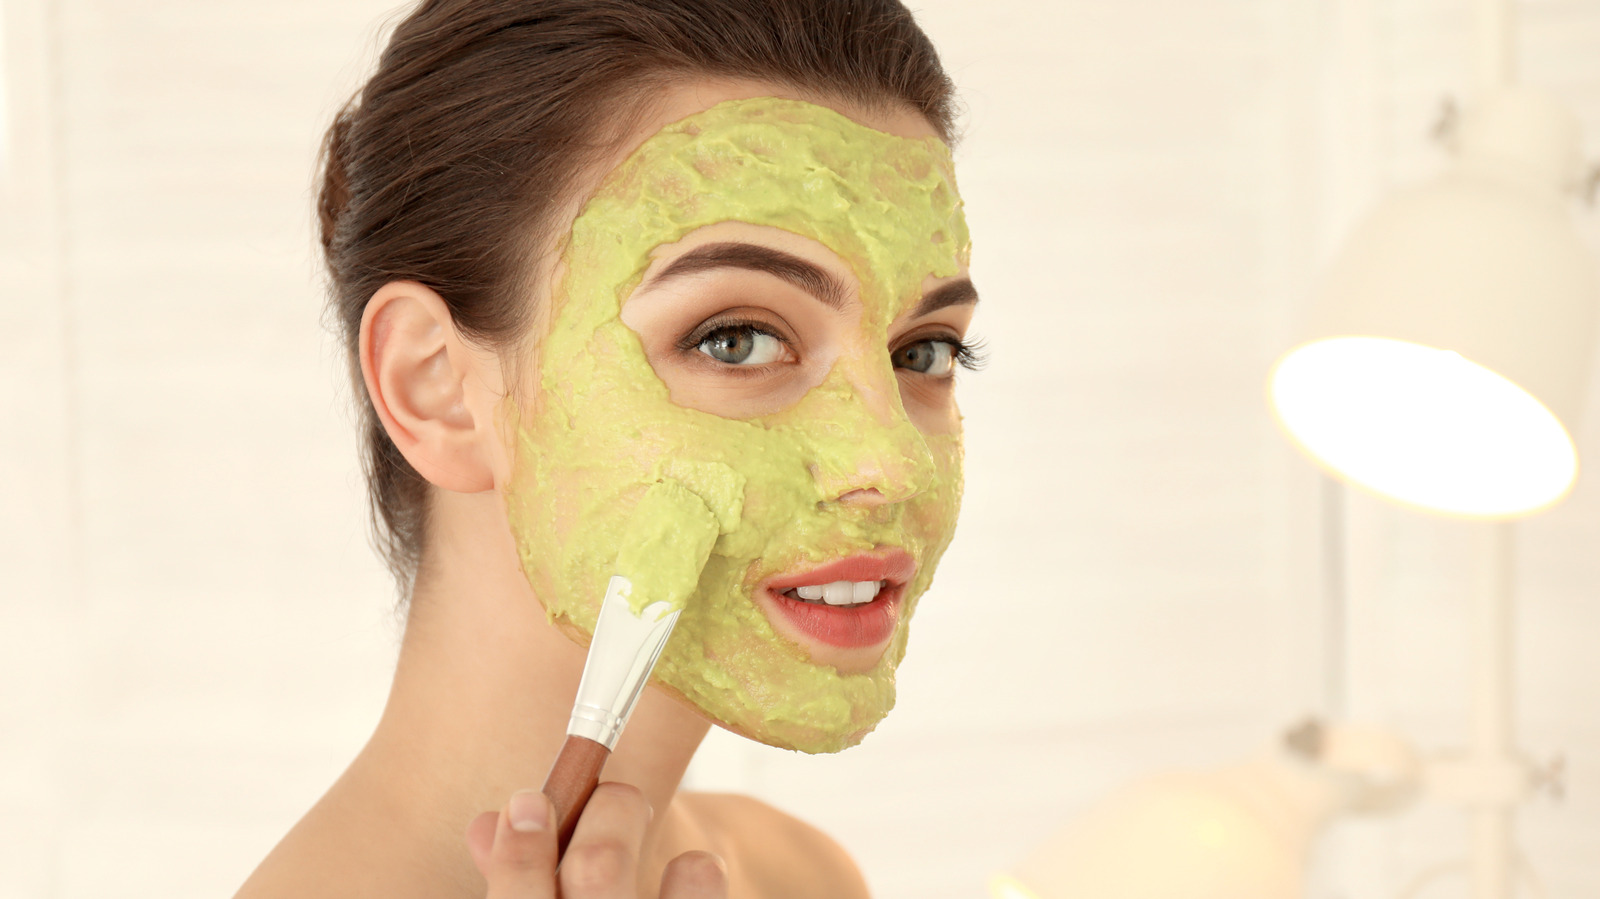 15 DIY Face Mask Ideas For Your Next Self-Care picture pic pic